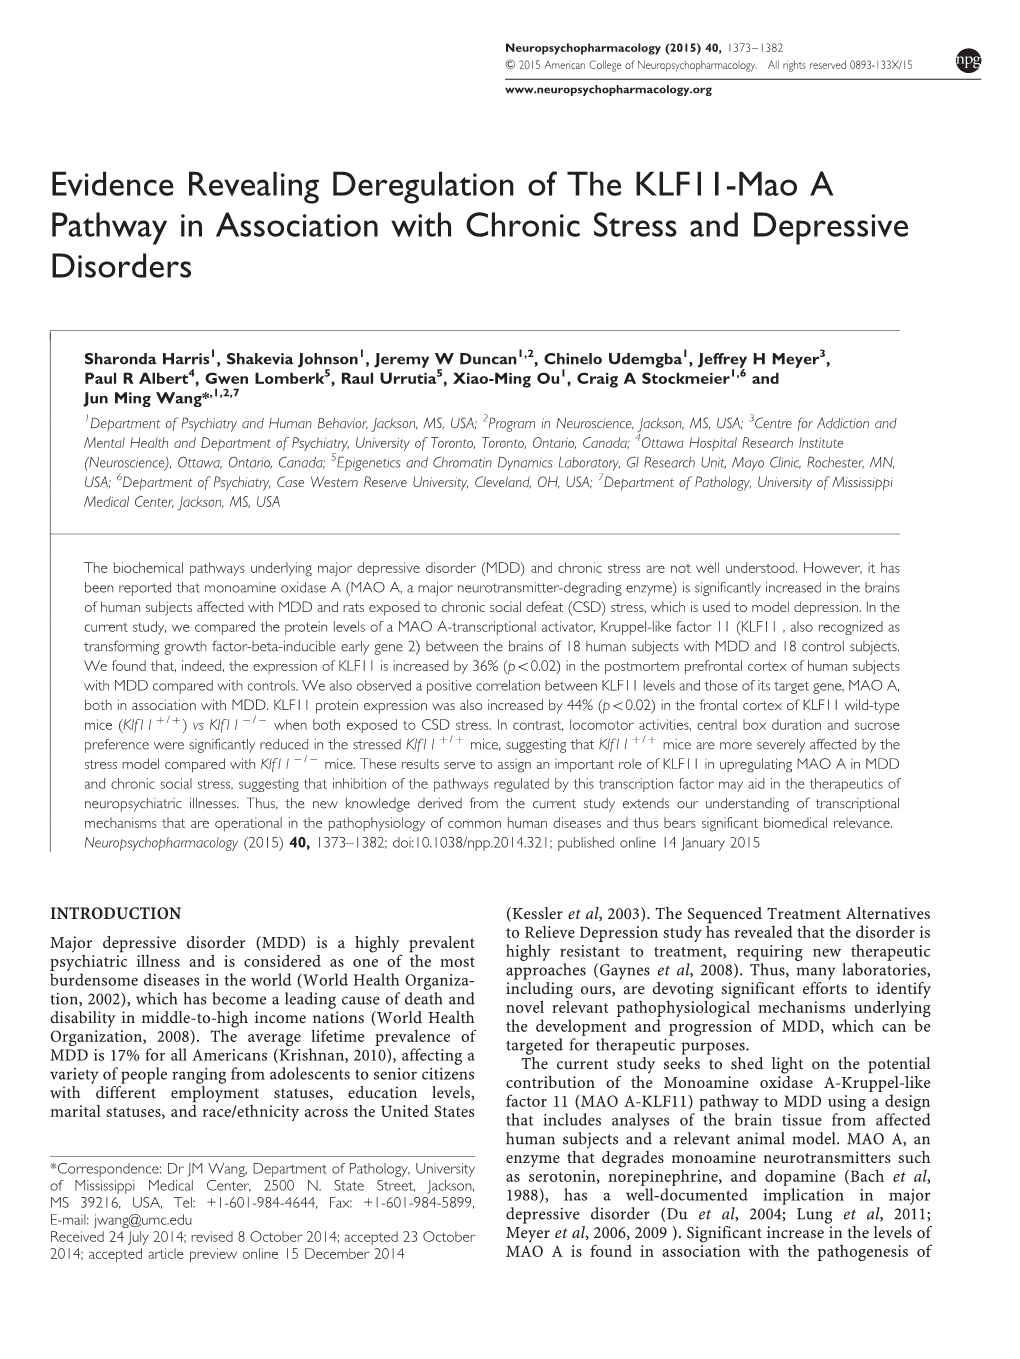 Evidence Revealing Deregulation of the KLF11-Mao a Pathway in Association with Chronic Stress and Depressive Disorders